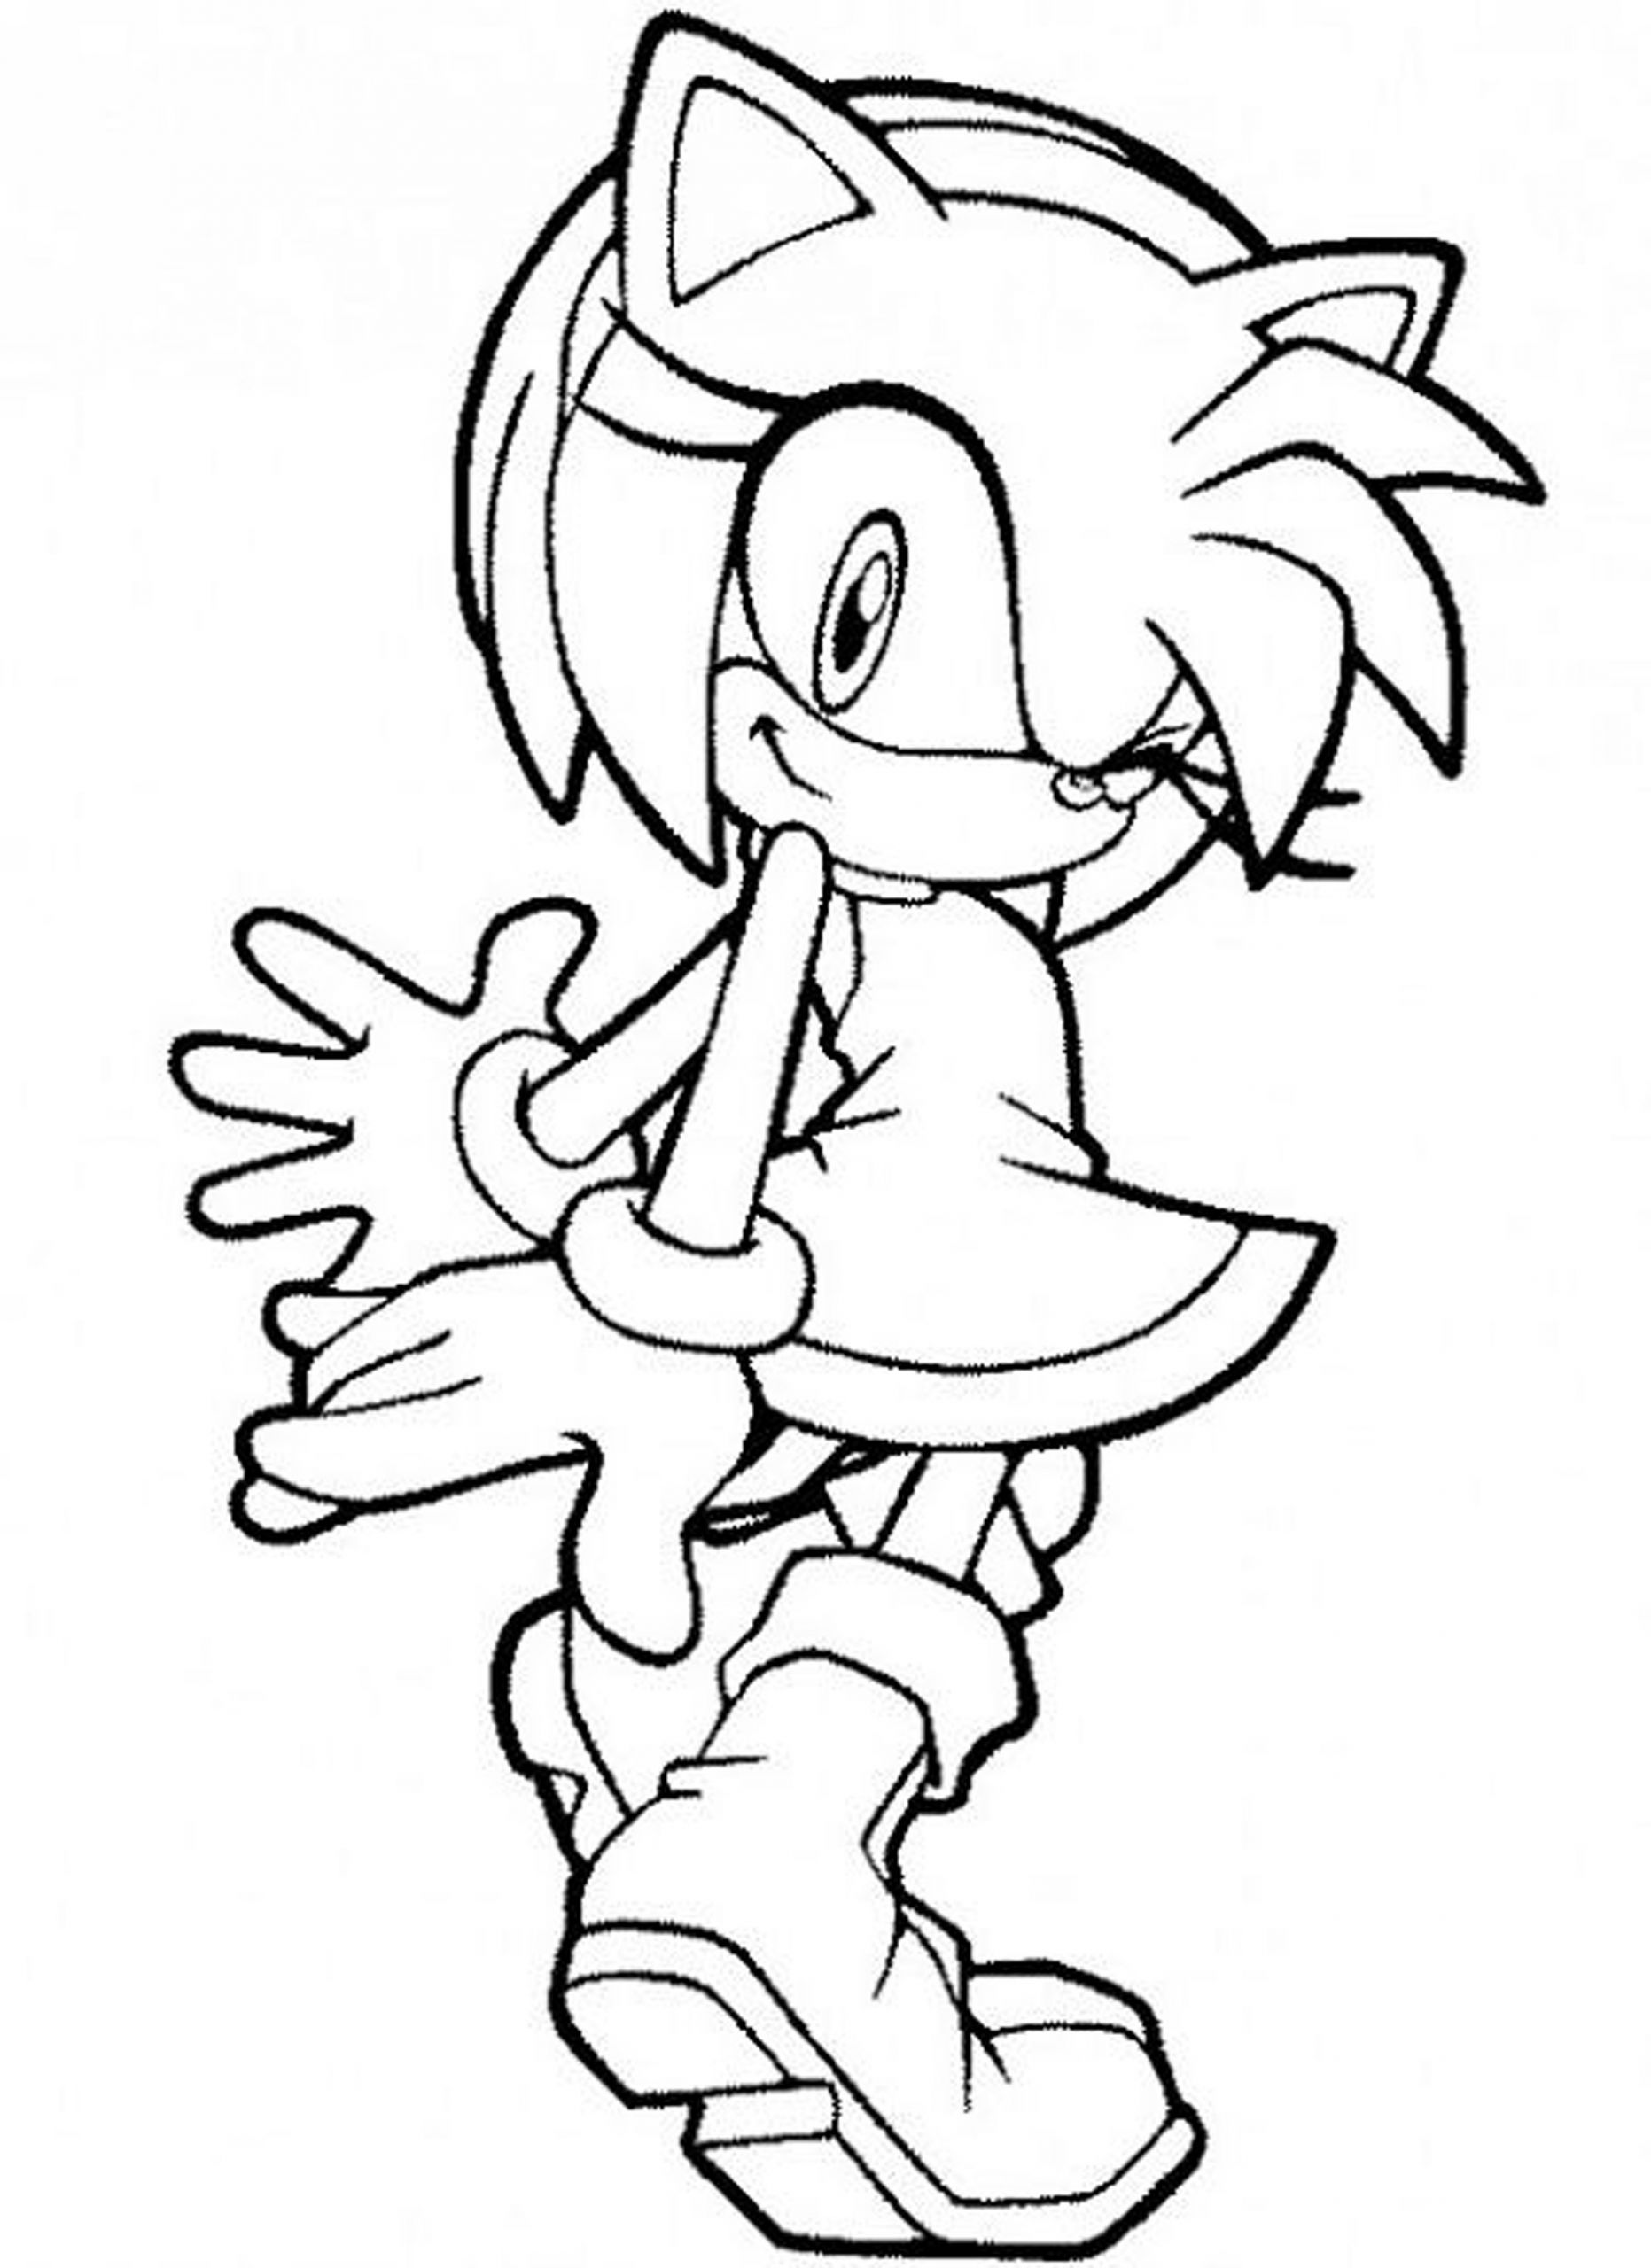 Free Coloring Pages For Girls
 Coloring Pages For Girls 9 And Up